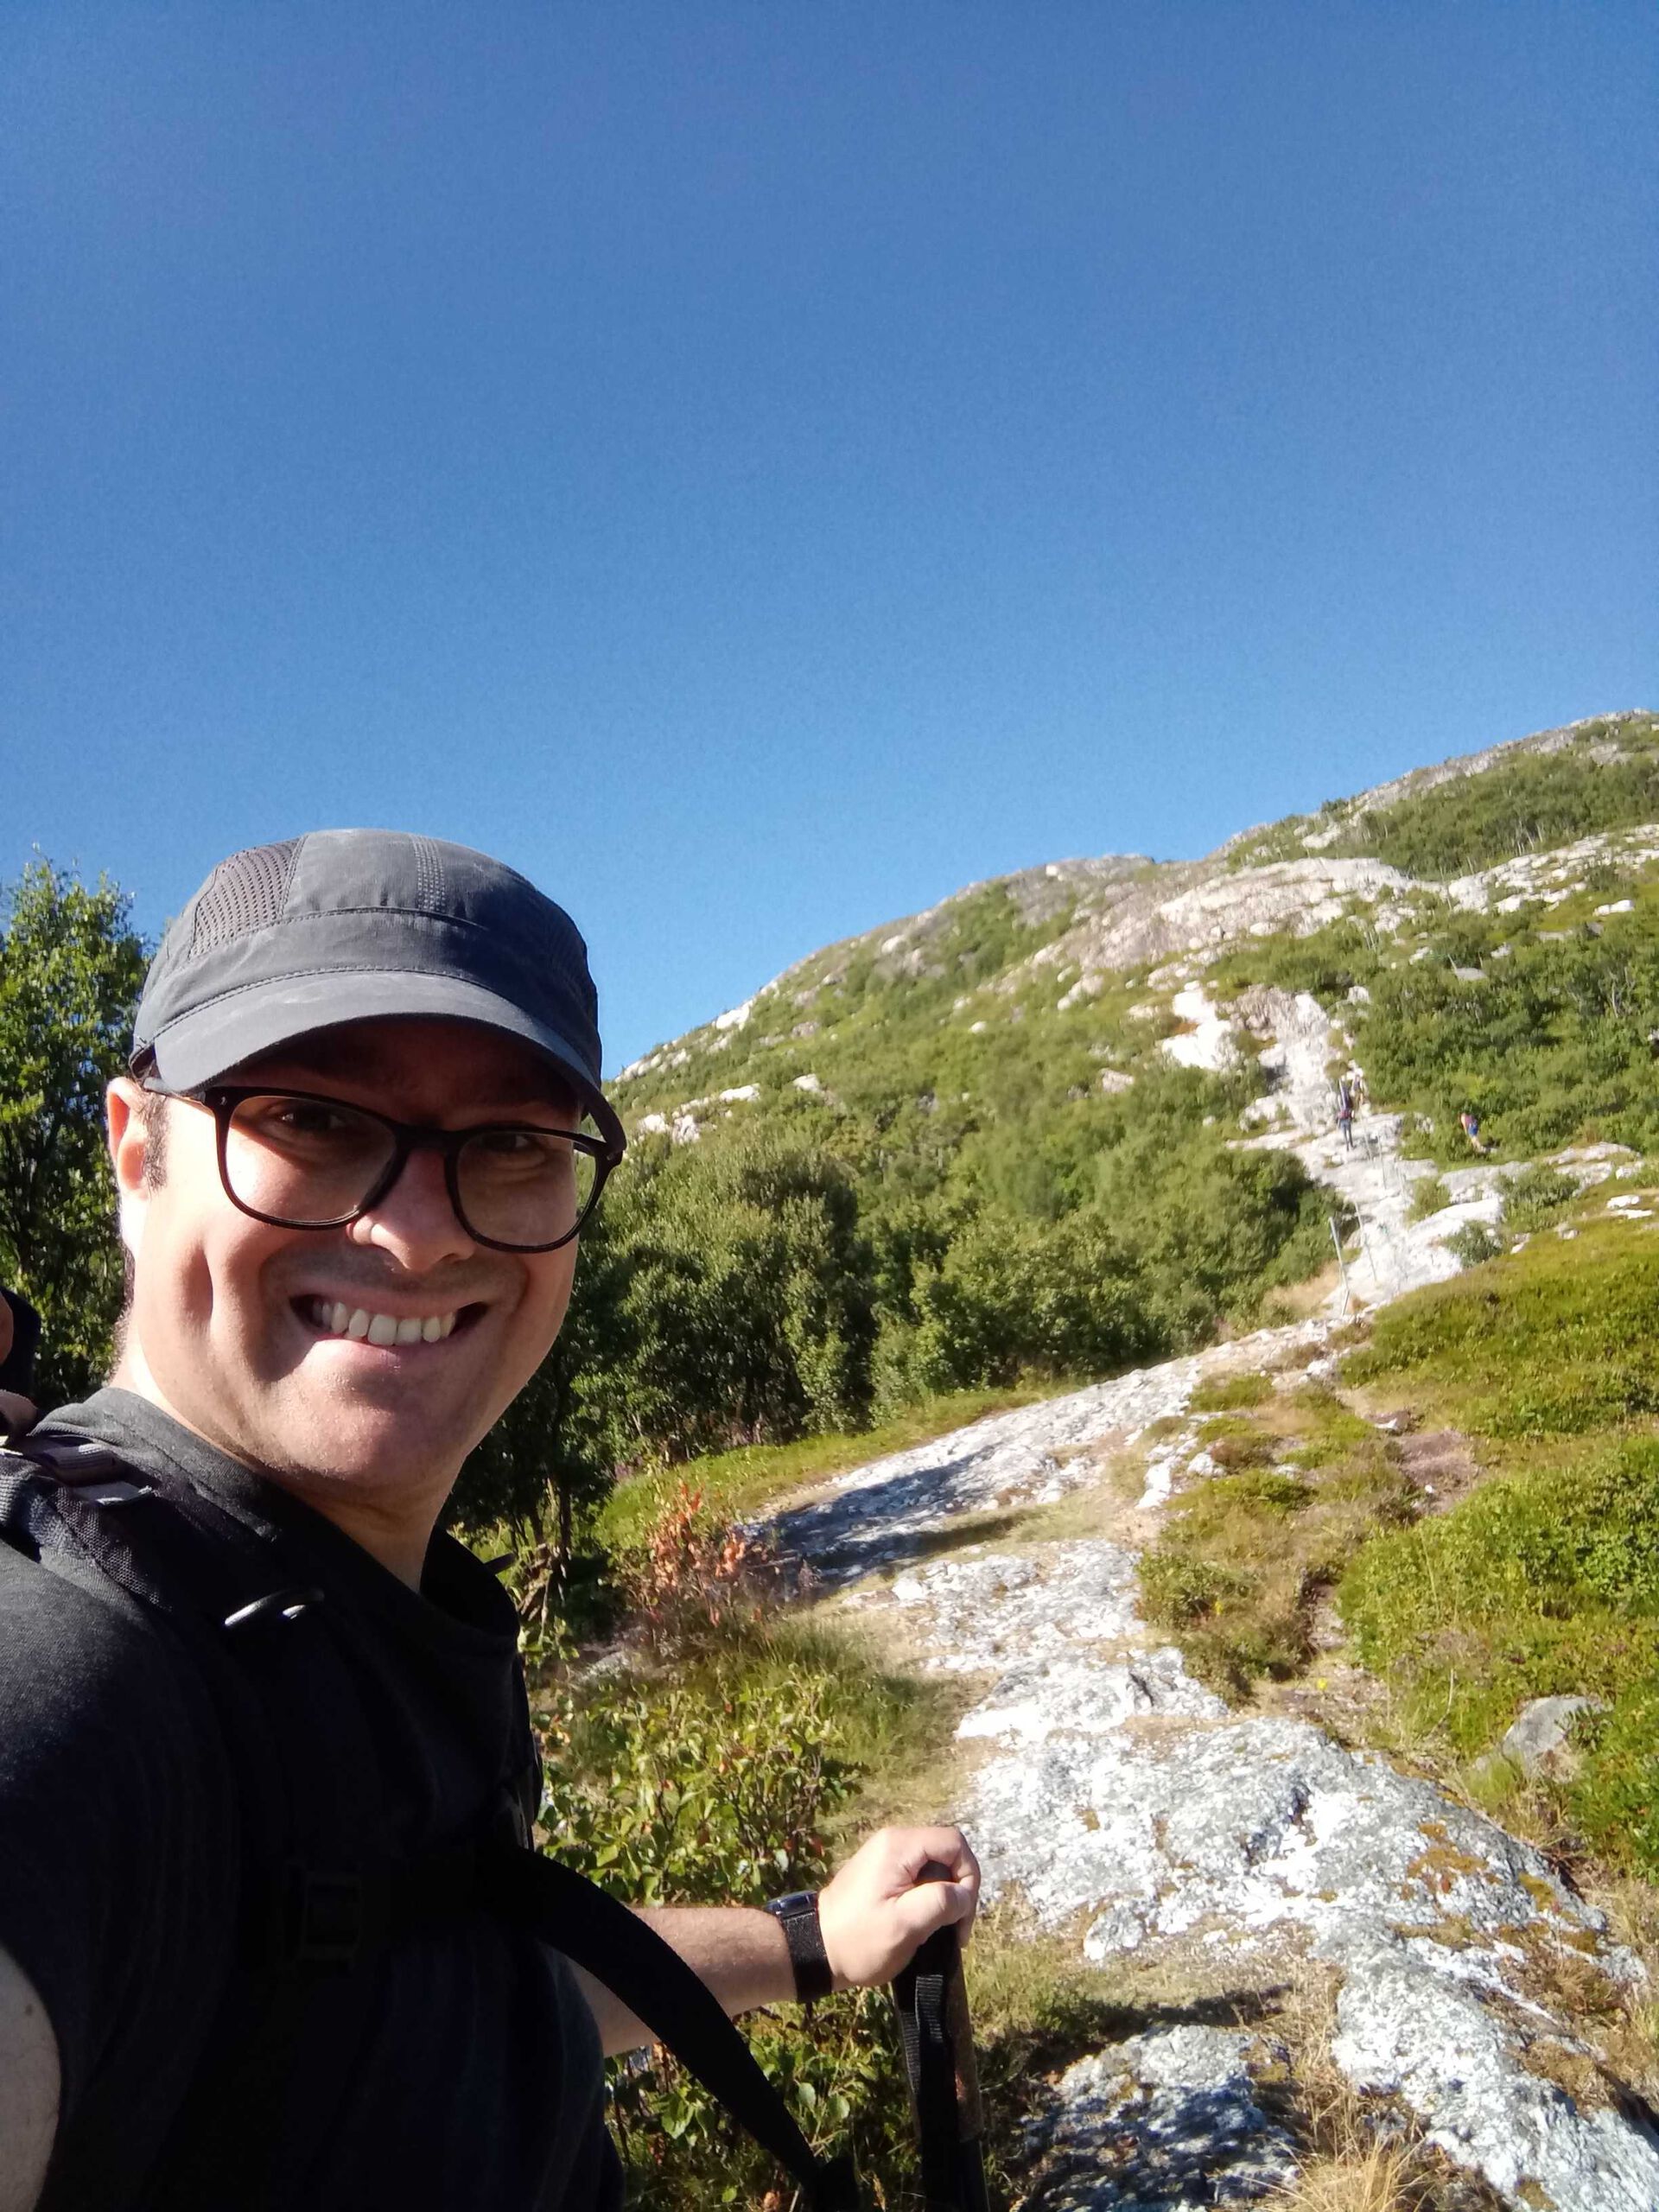 Zsolt out hiking, smiling